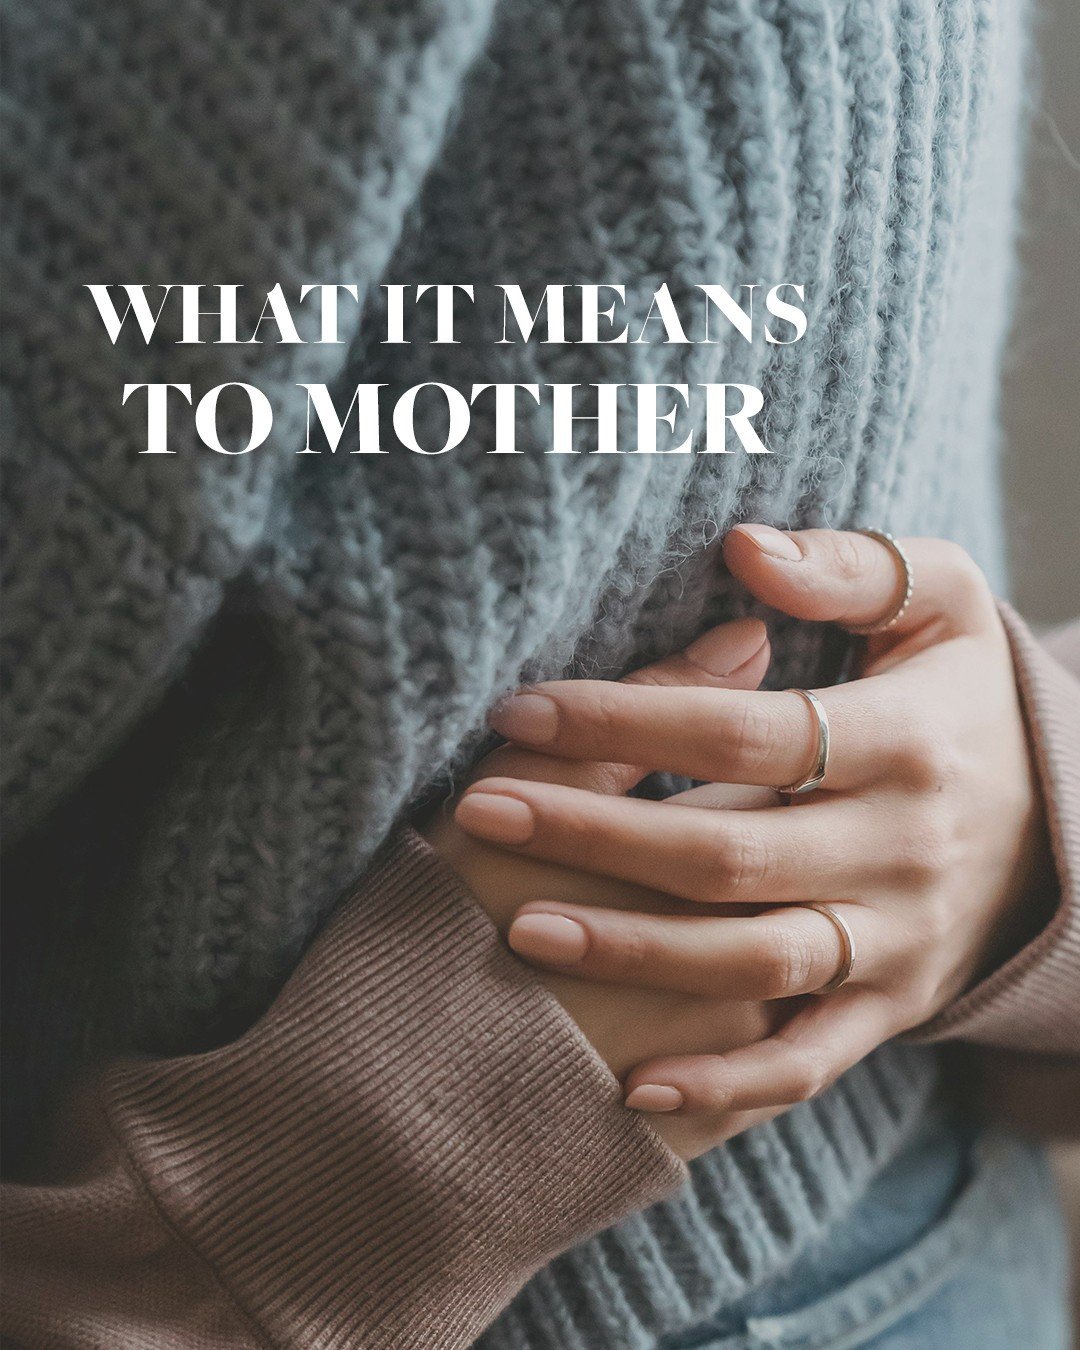 You may not believe you&rsquo;re a mother.⁠
⁠
But what if &ldquo;mothering&rsquo; happens whether or not you have given birth? What if mothering is something you do when you hope for another person, when you believe for them, when you fight for them 